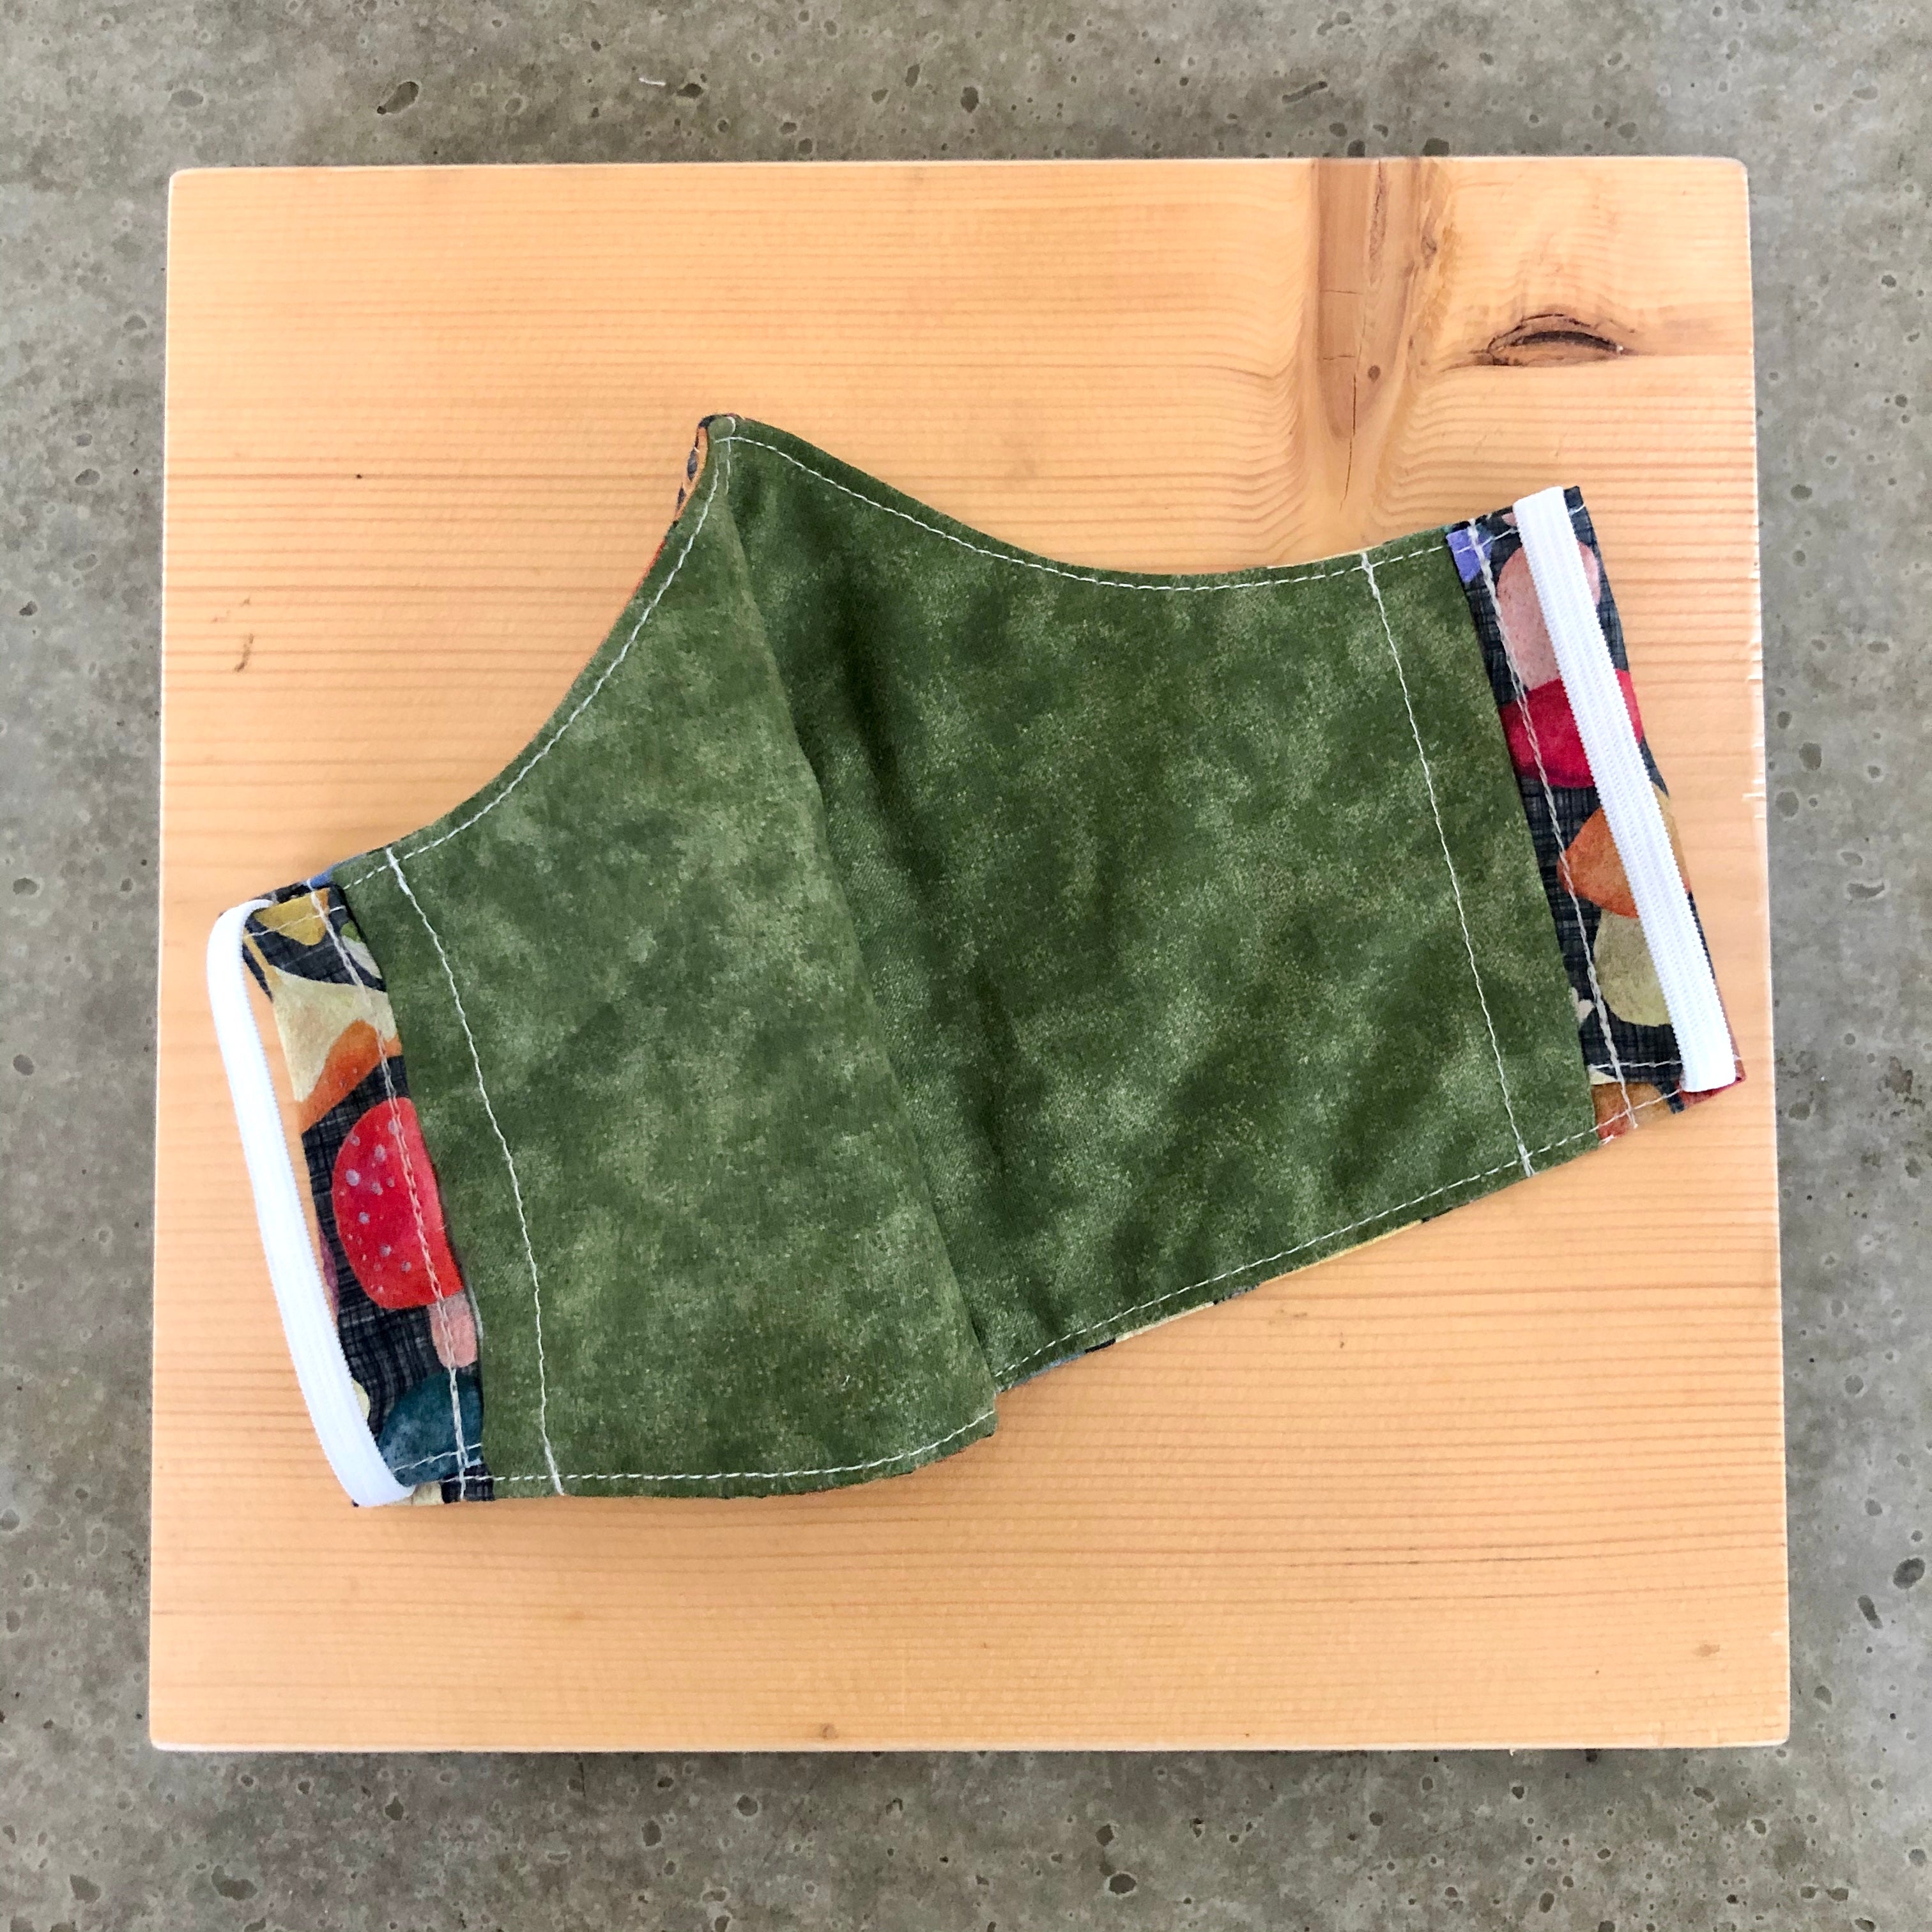 Inside view of the mushroom mask, showing the olive green fabric and ear elastic.